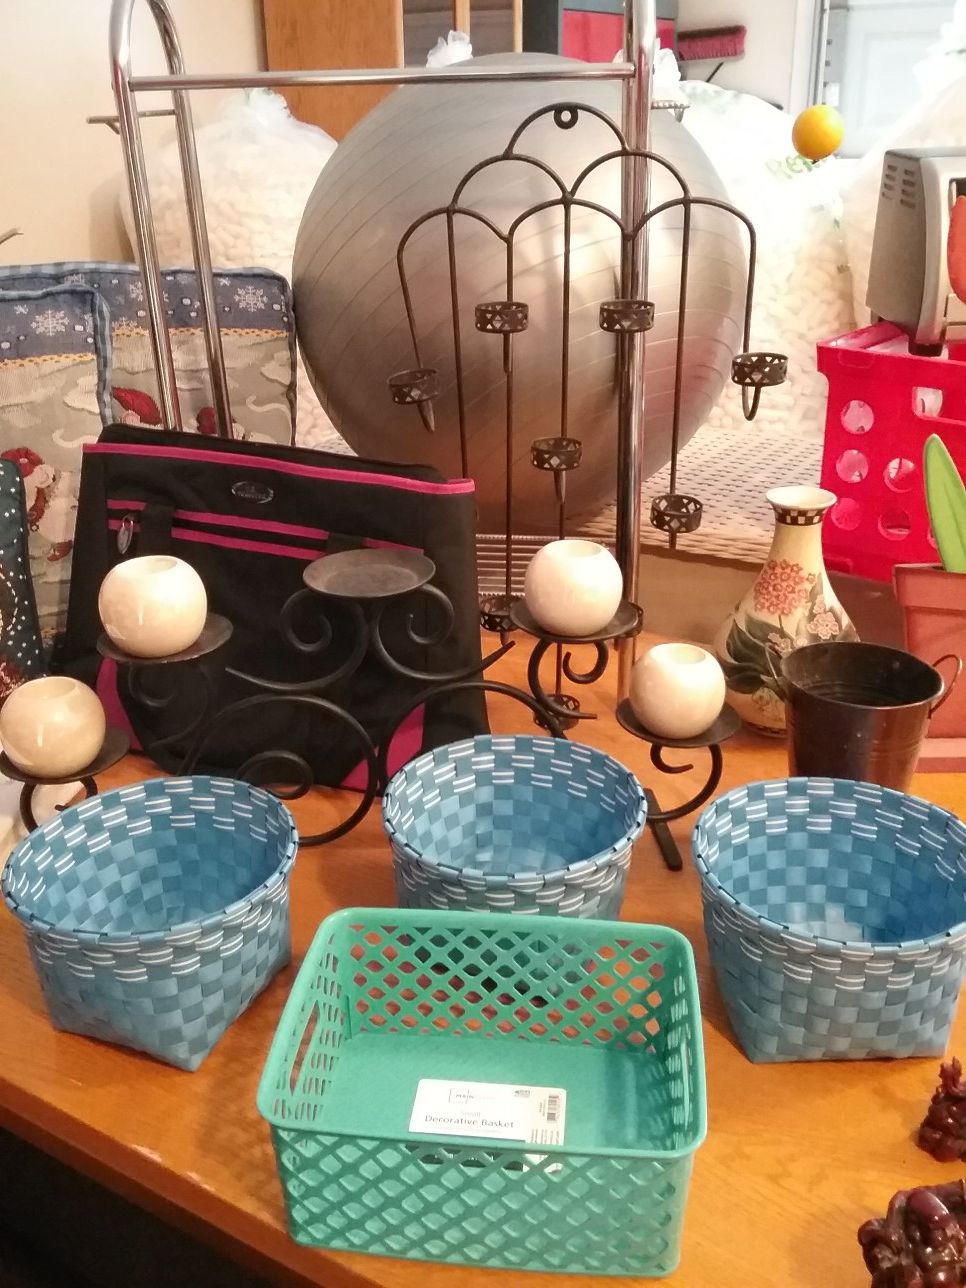 Toaster oven Storage crate chicken wire basket Chinese flower pot candle holders duffle bag